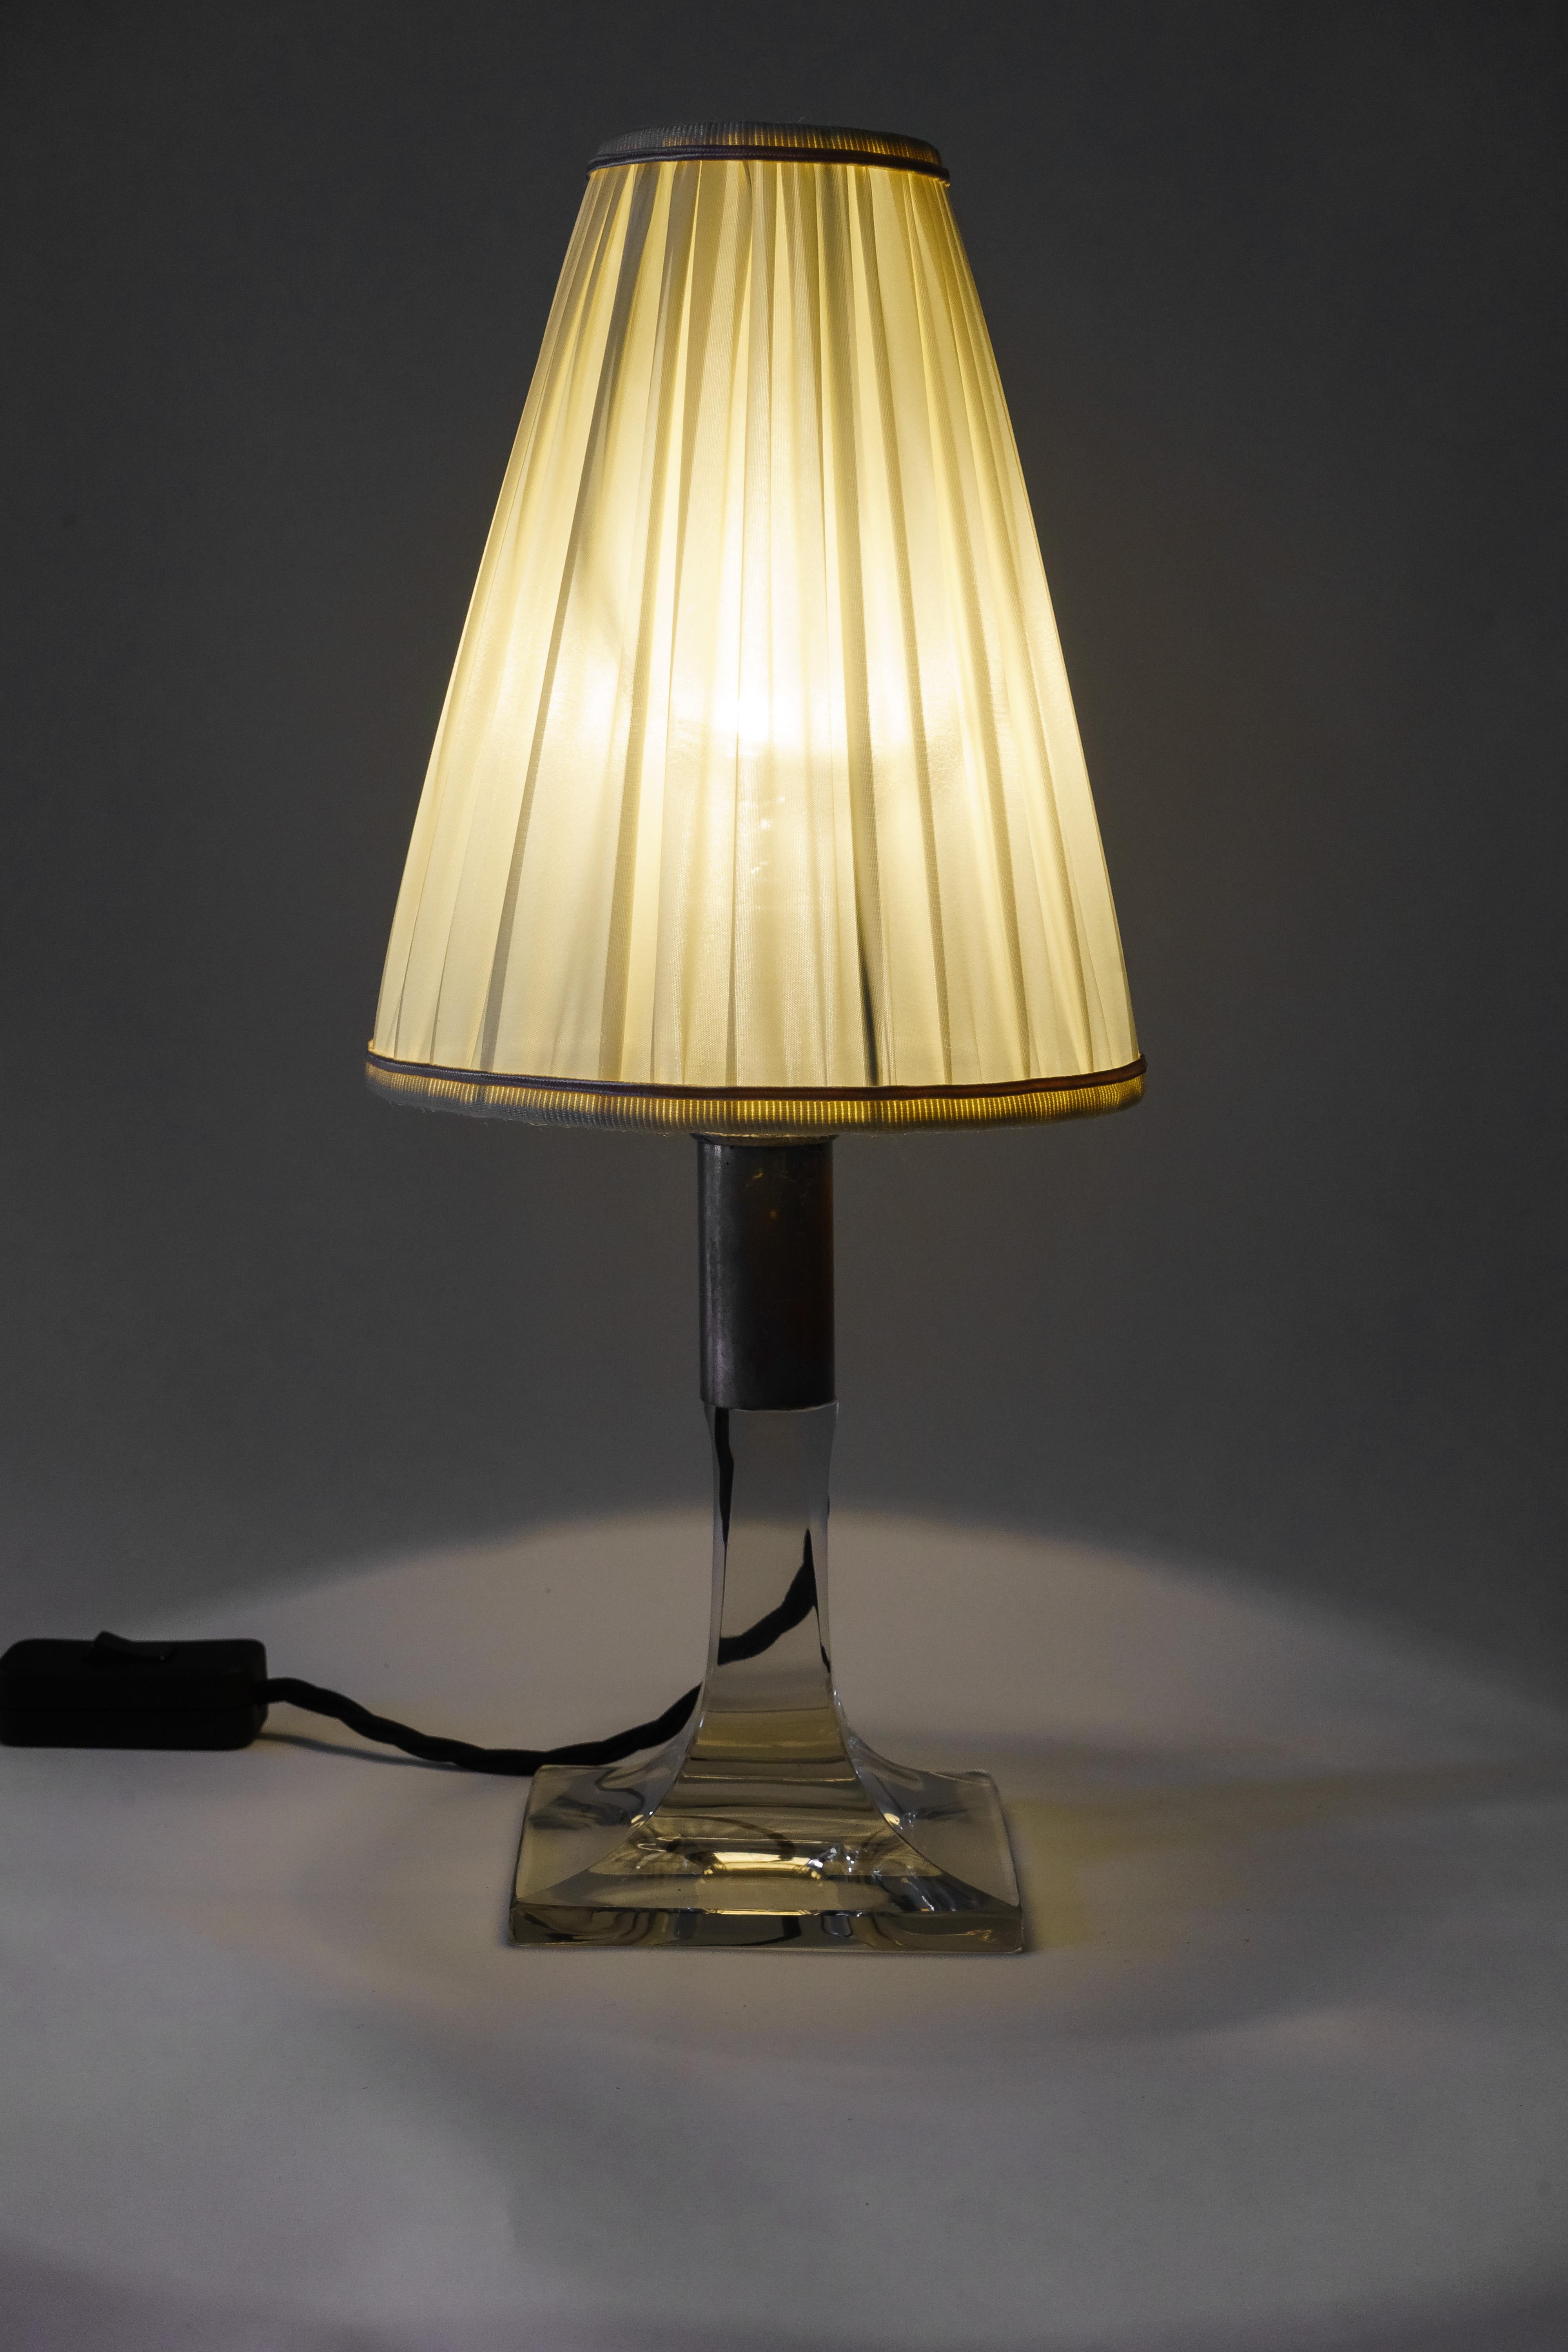 Art Deco glass table lamp with fabric shade Vienna, circa 1920s
Glass
Brass nickel-plated
Original condition
Fabric shade is replaced ( new ).